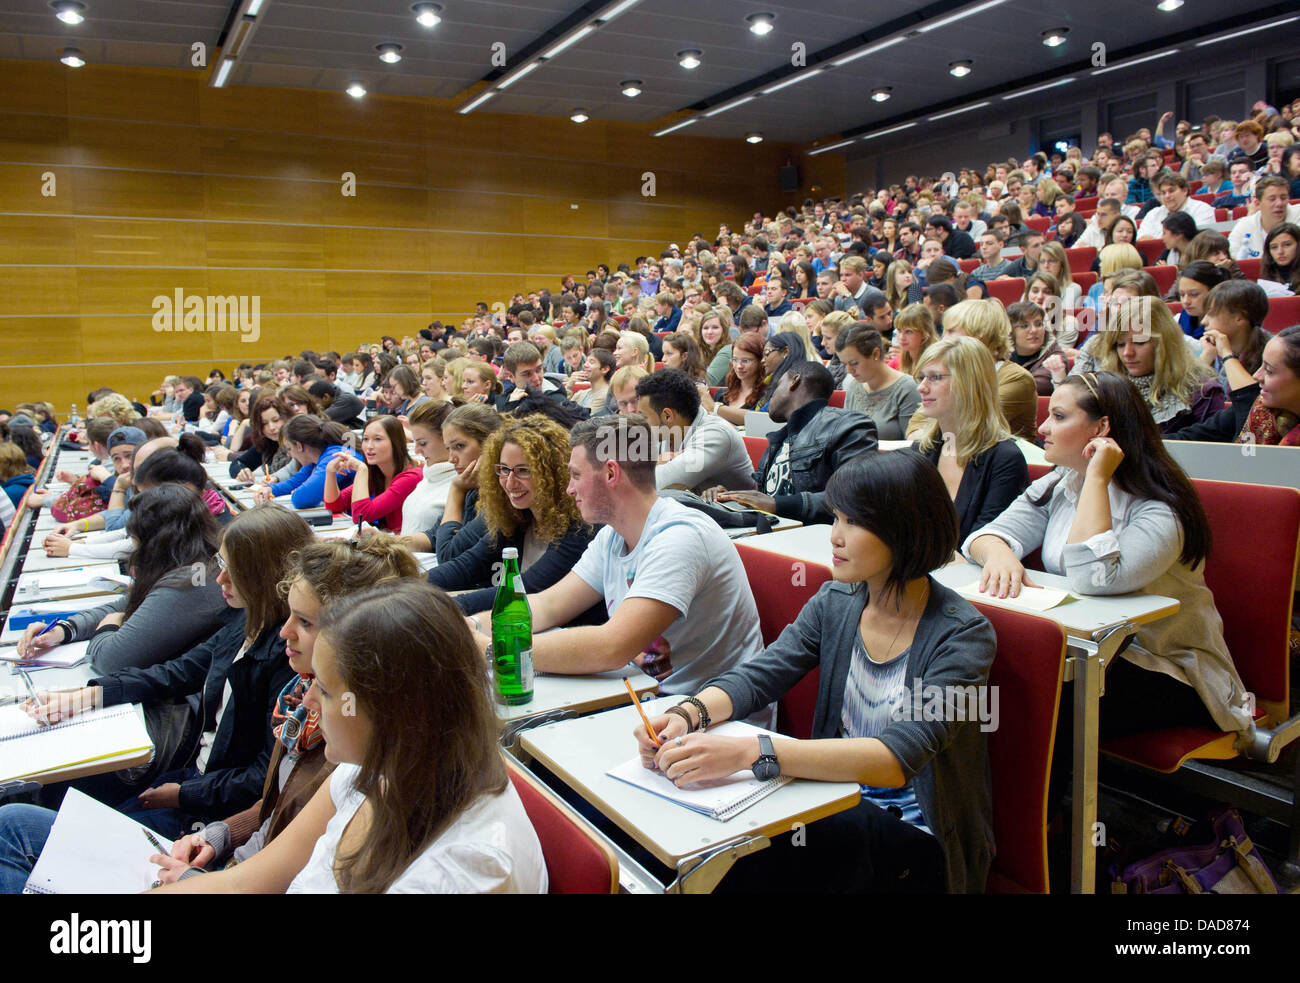 New students of Viadrina European University attend an introduction for the winter semester at Viadrina European University, Frankfurt Oder, Germany, 10 October 2011. The same day orientation week began for 1300 new students. About 6500 students attend Viadrina University. Photo: Patrick Pleul Stock Photo